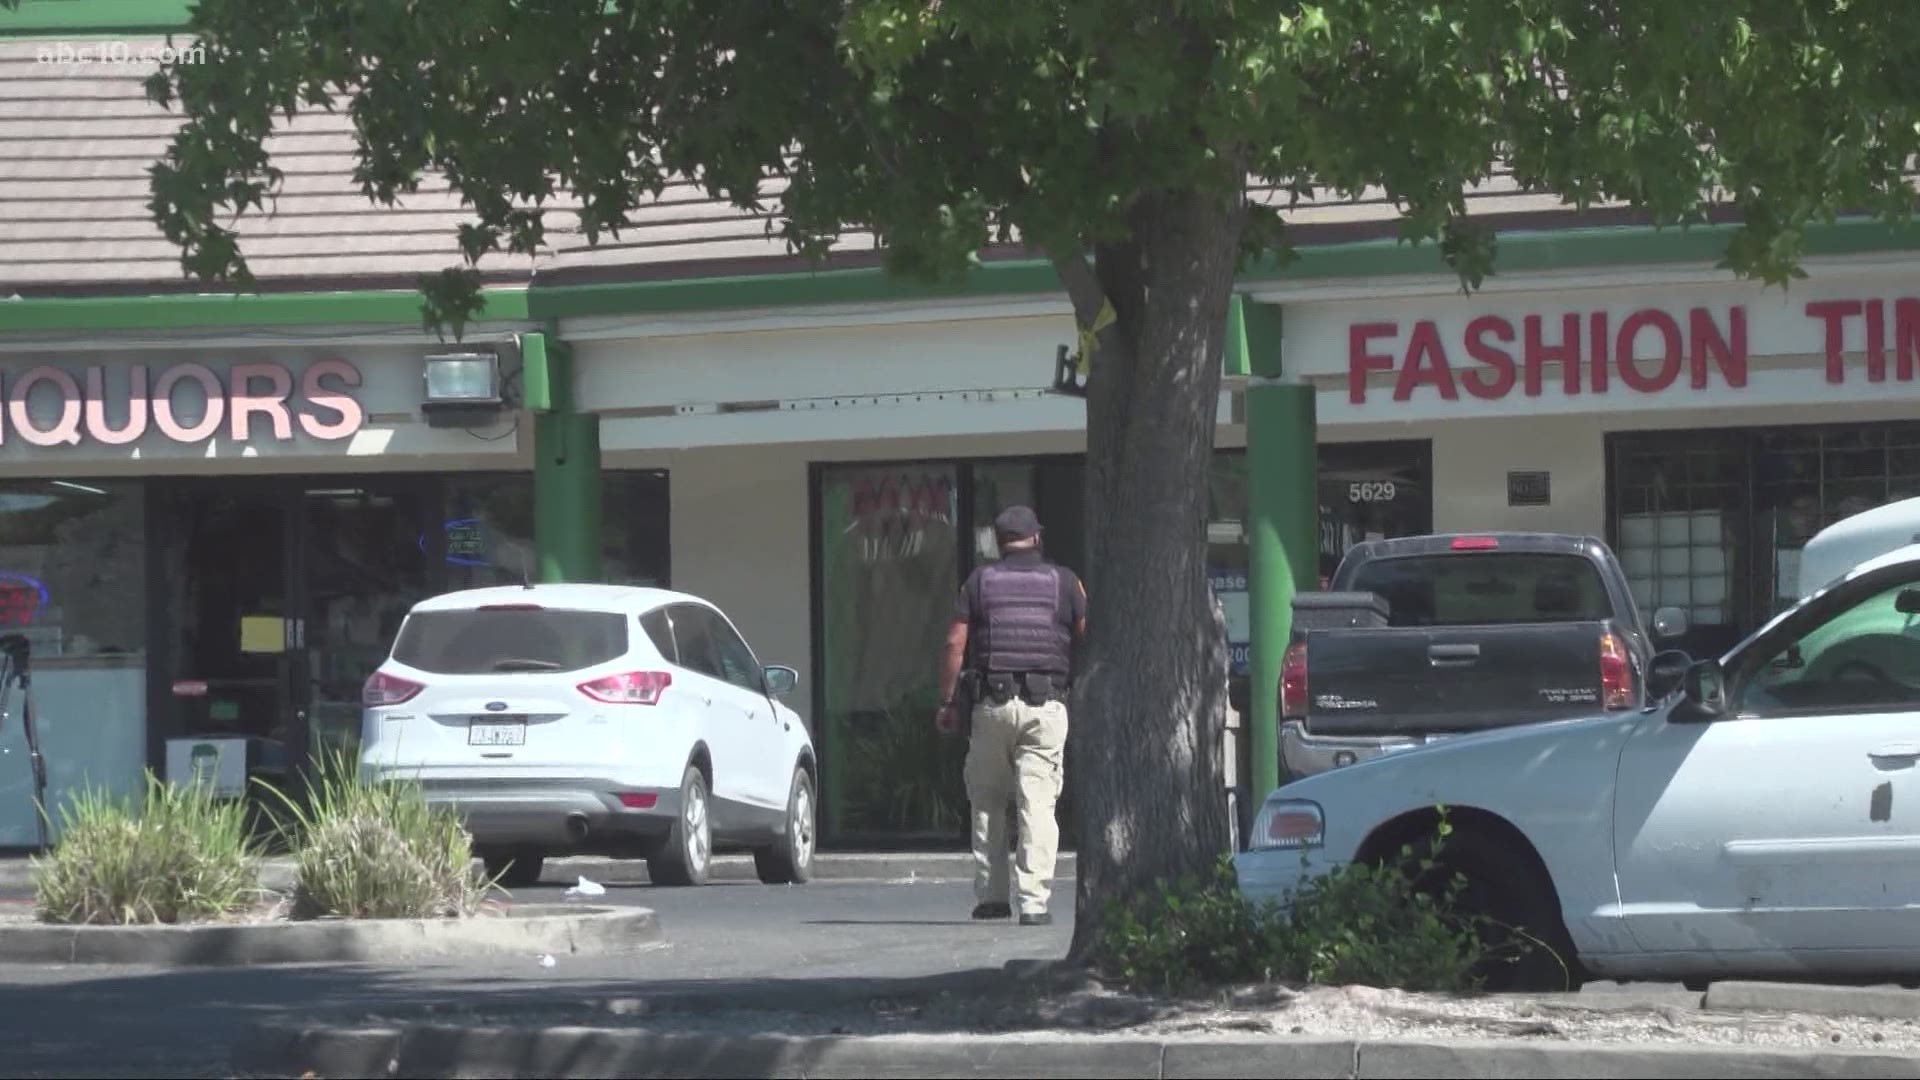 A judge is allowing the city of Sacramento to seek penalties and closure of Evergreen Shopping Center if drug or gang activity continues on the property.